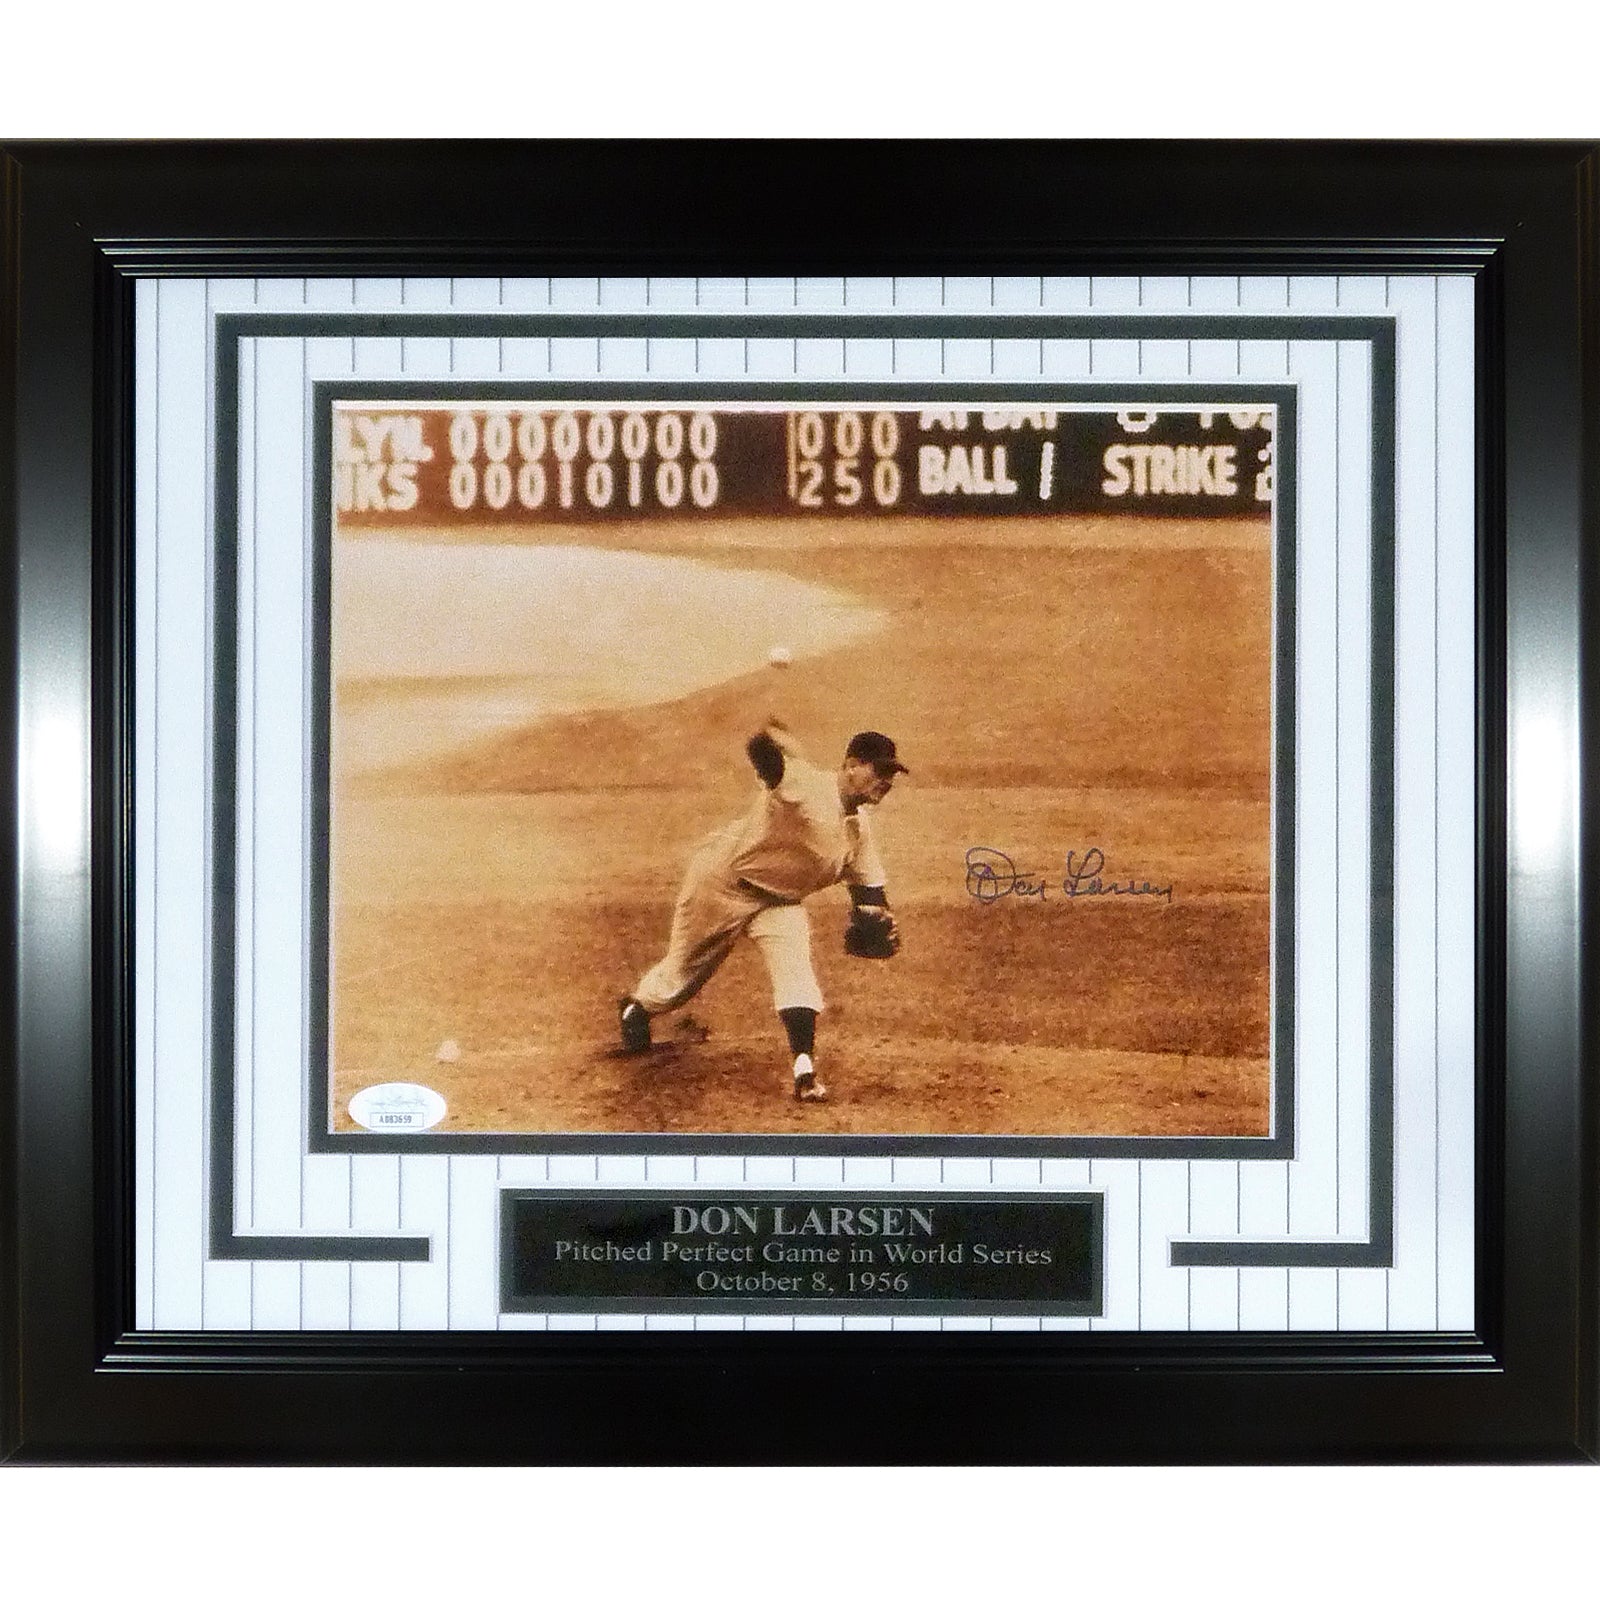 Don Larsen Autographed New York Yankees (Perfect Game) Framed 8x10